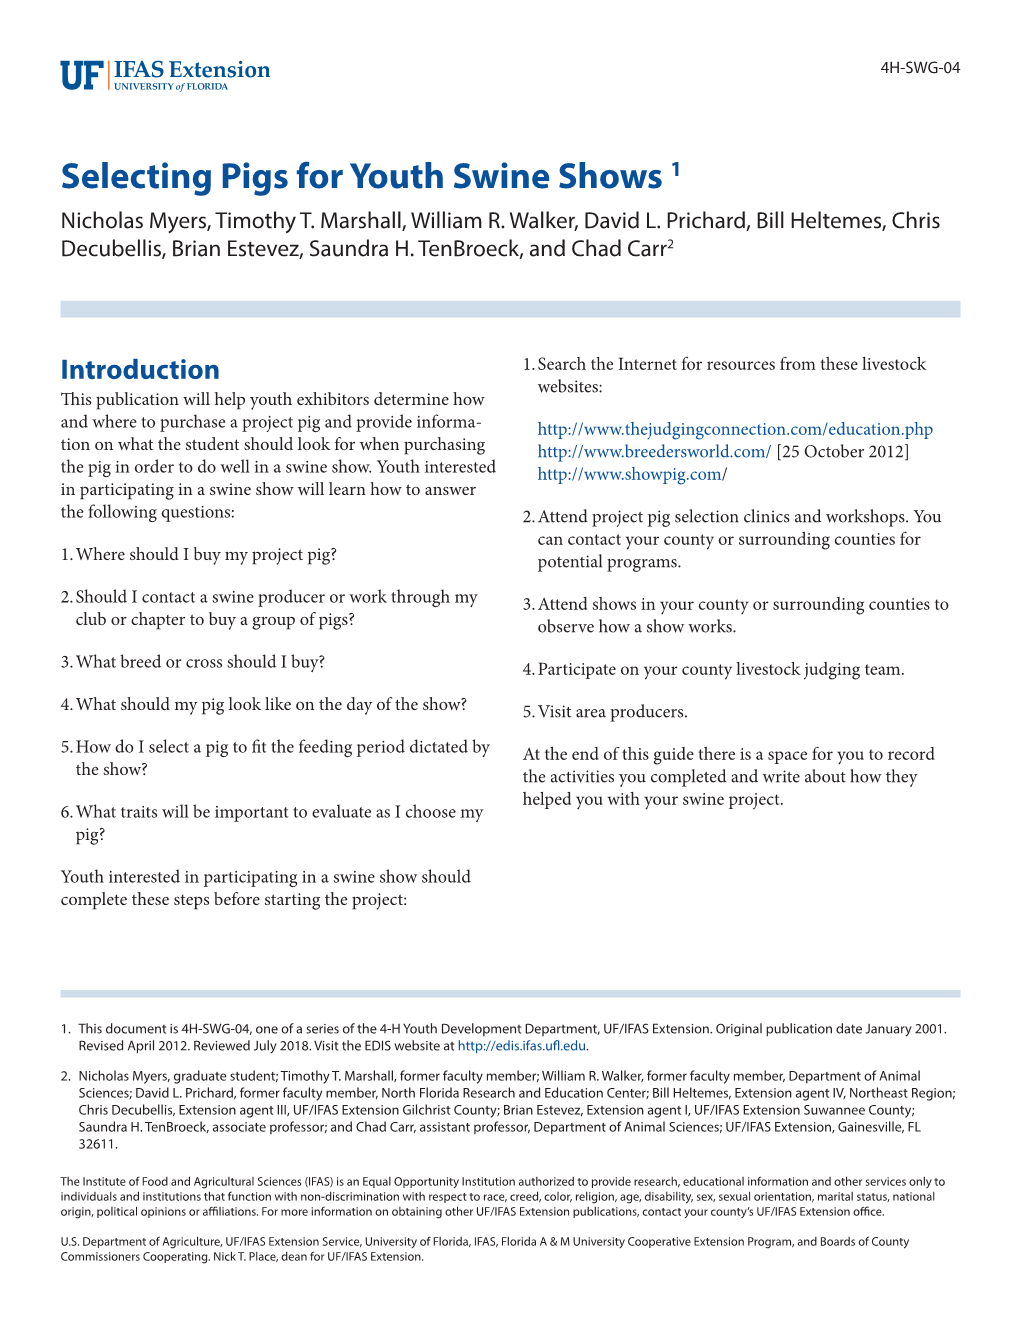 Selecting Pigs for Youth Swine Shows 1 Nicholas Myers, Timothy T